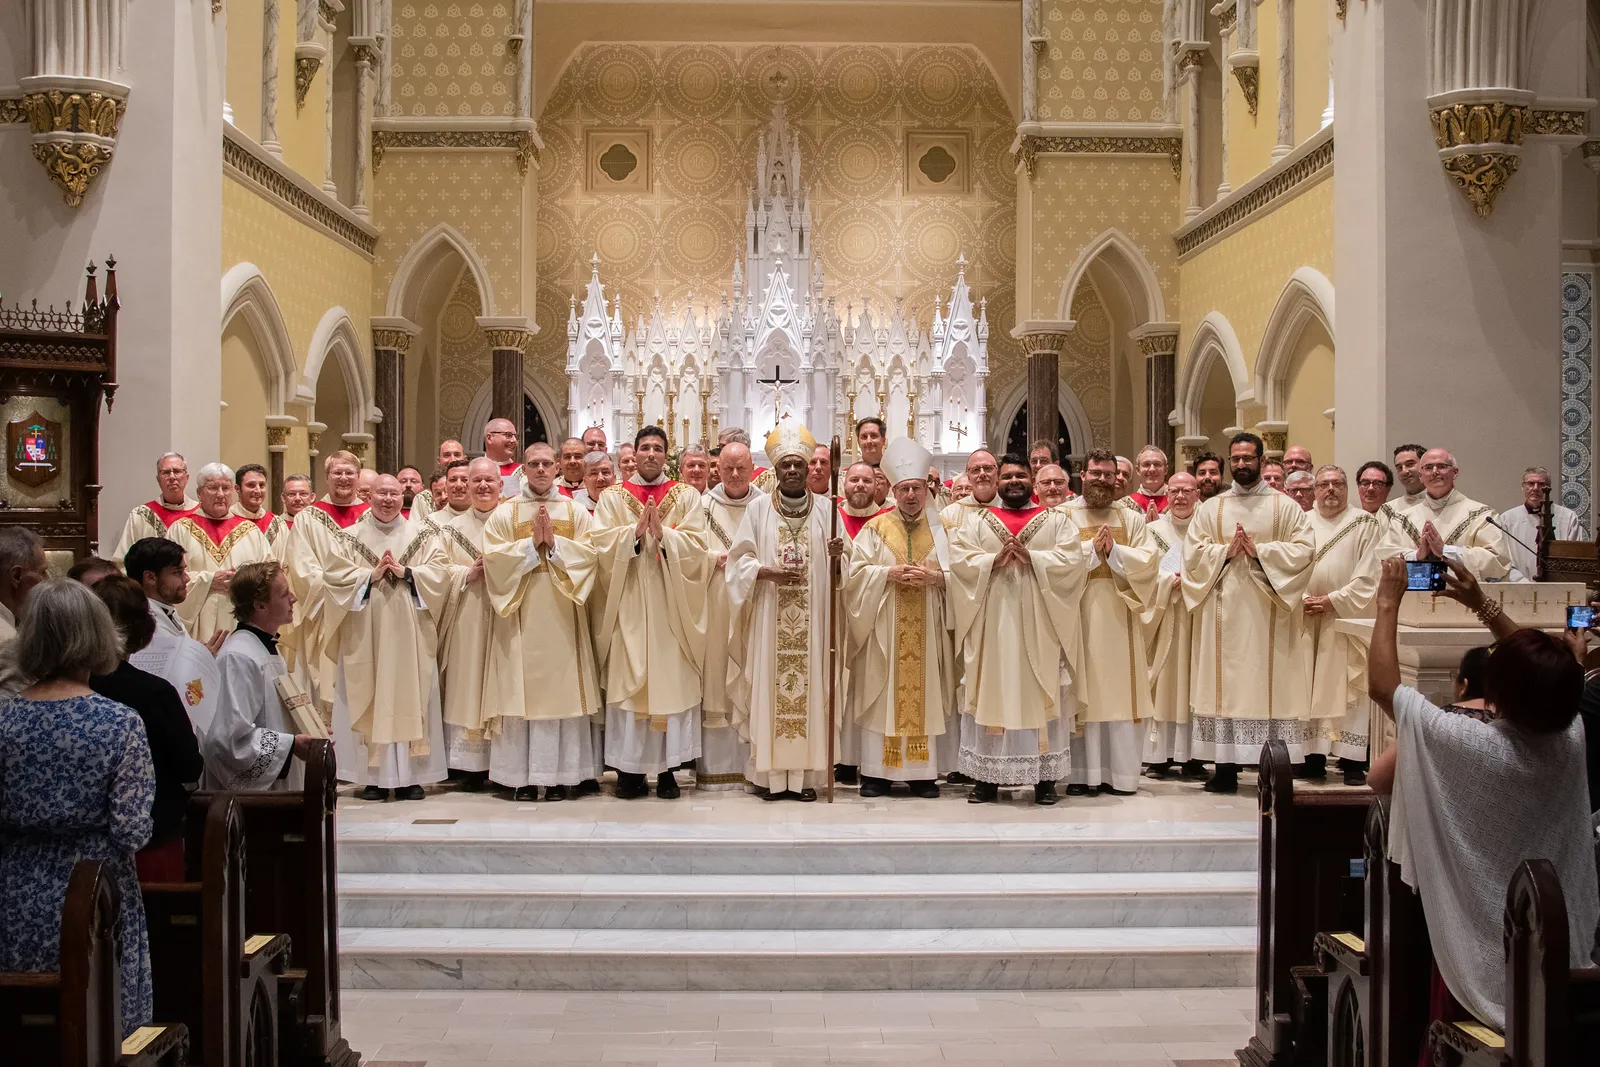 The rise of the Catholic population in South Carolina